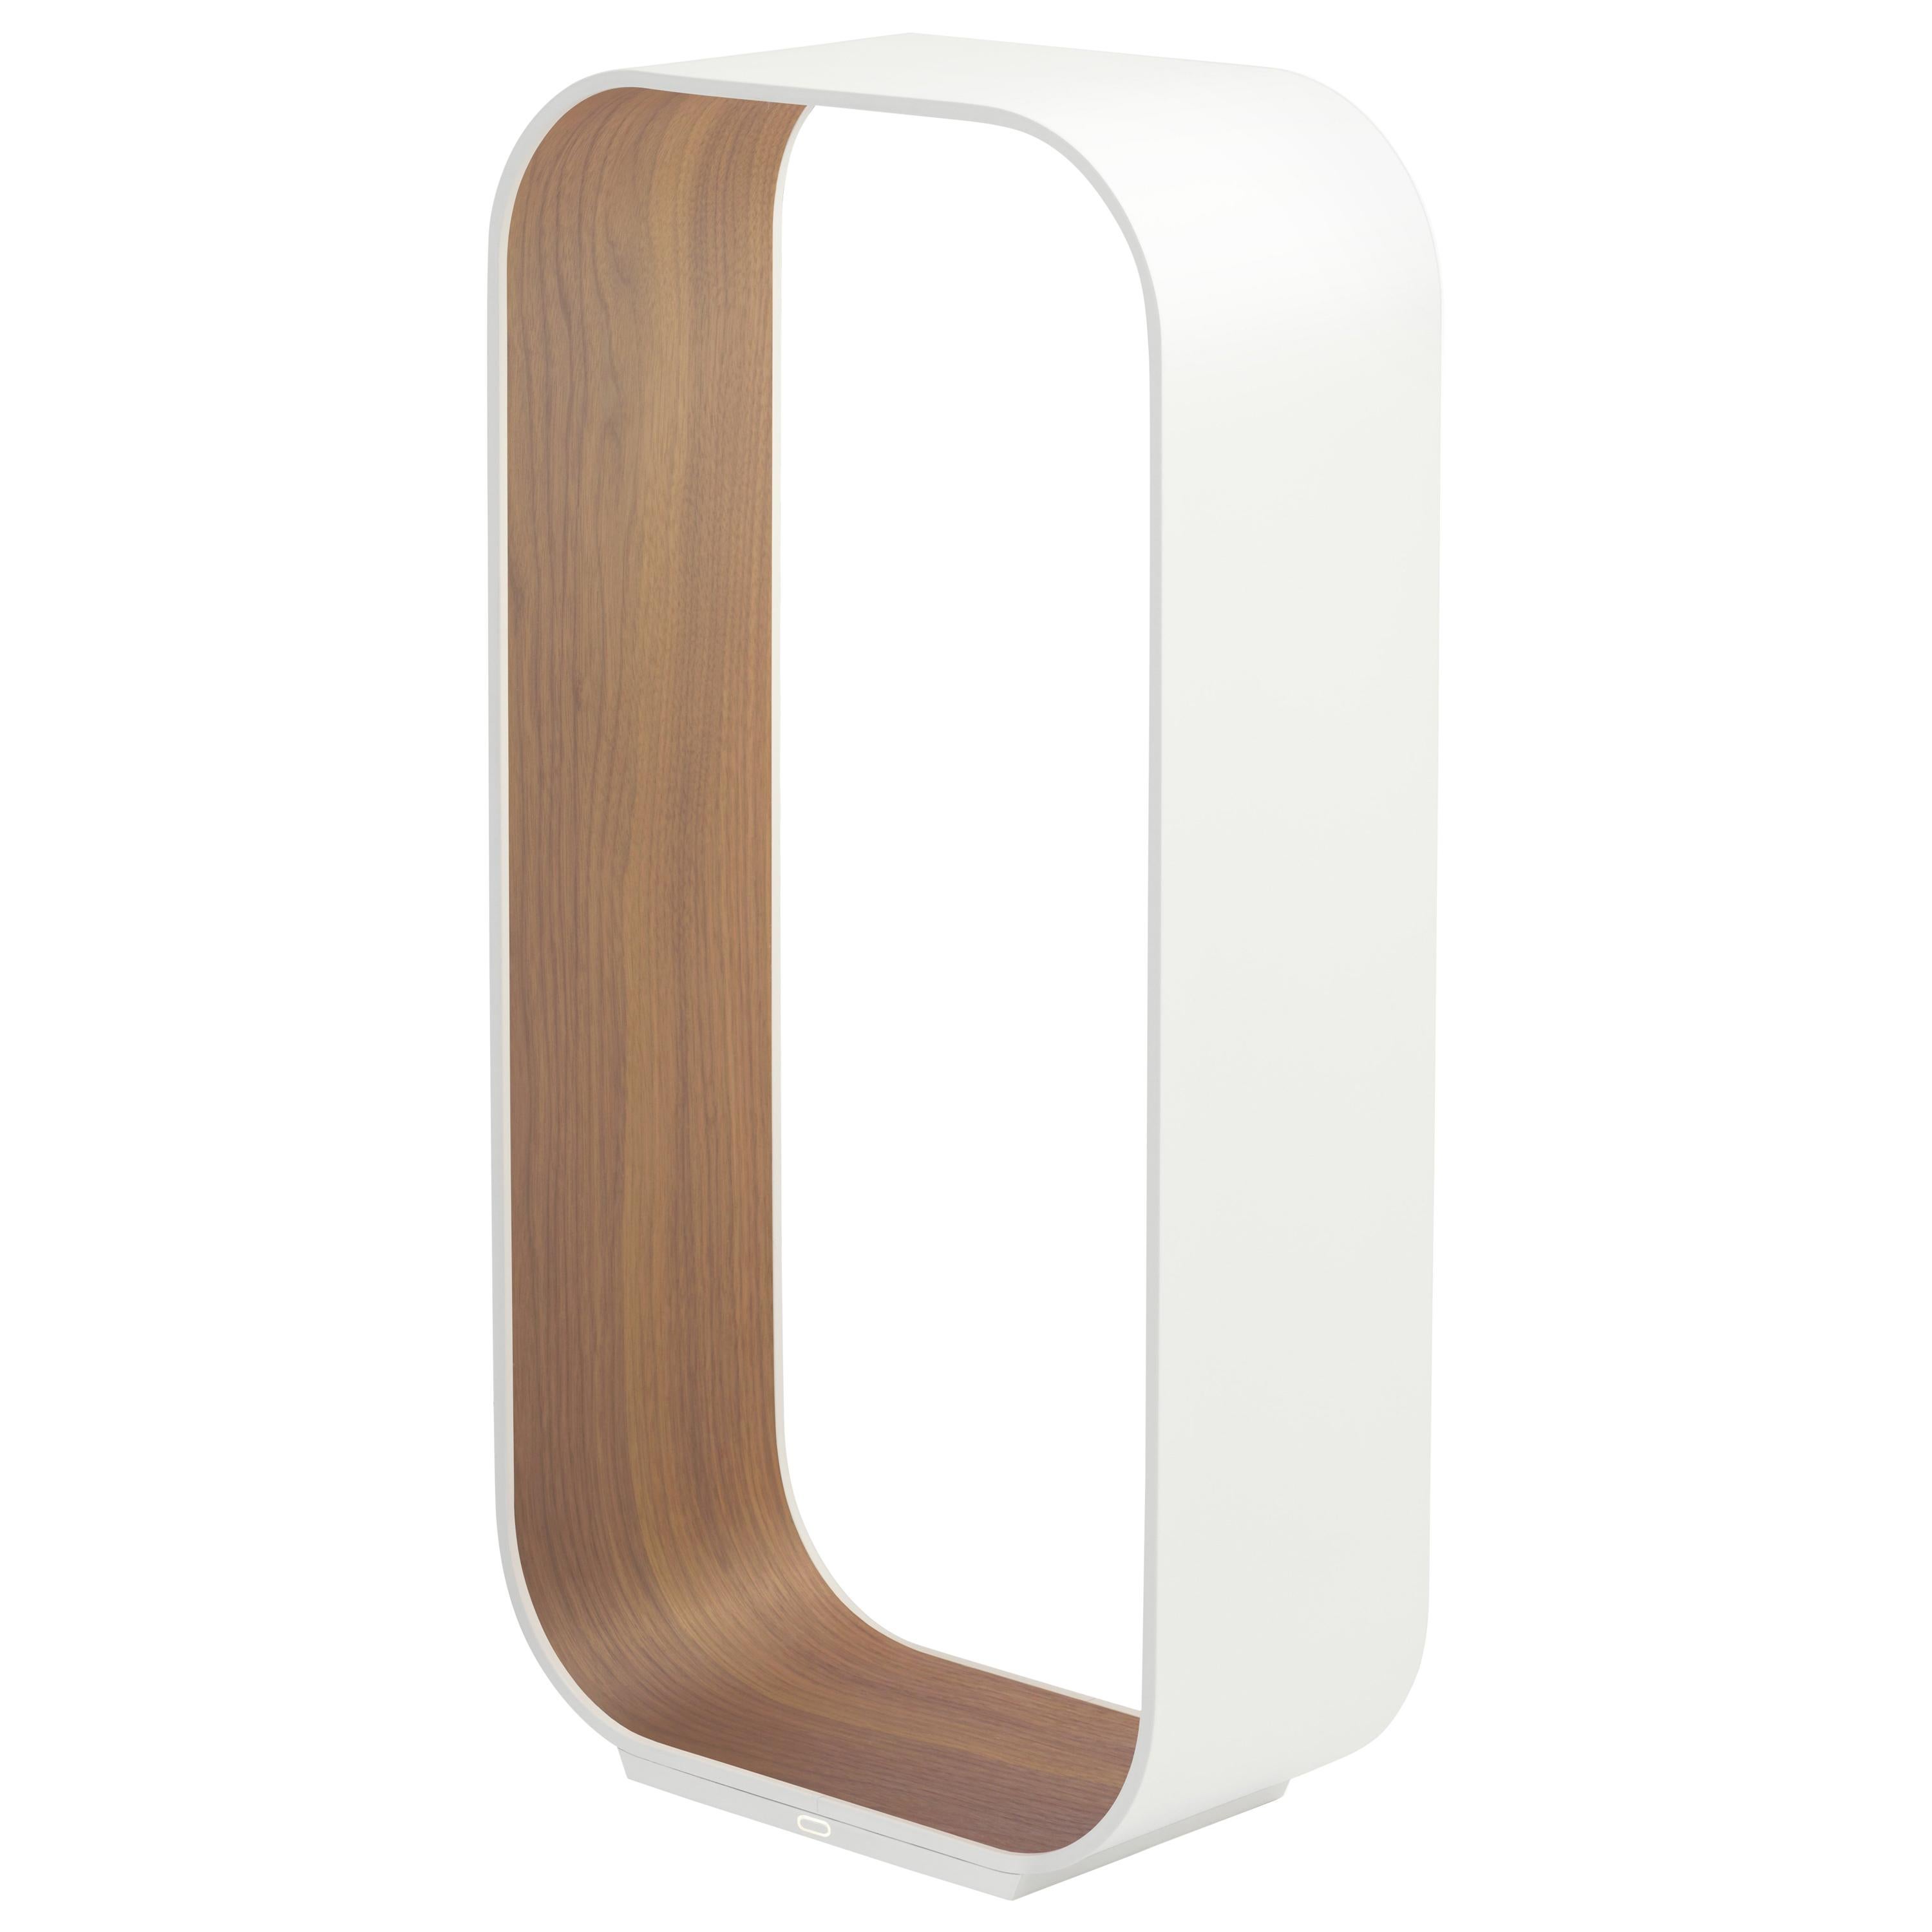 Contour Large Table Lamp in White and Walnut by Pablo Designs